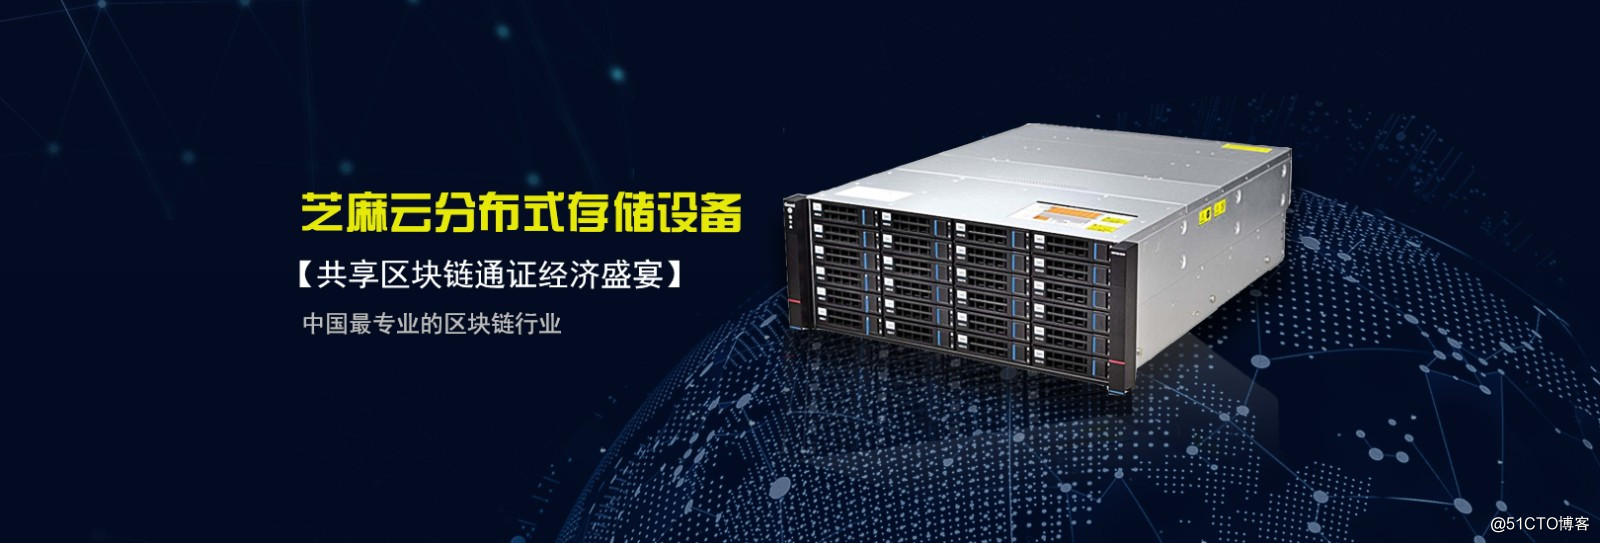 YottaChain distributed data storage block chain of the present invention, secure storage and processing of data rewriting worldwide problem --- "to the re-encrypted